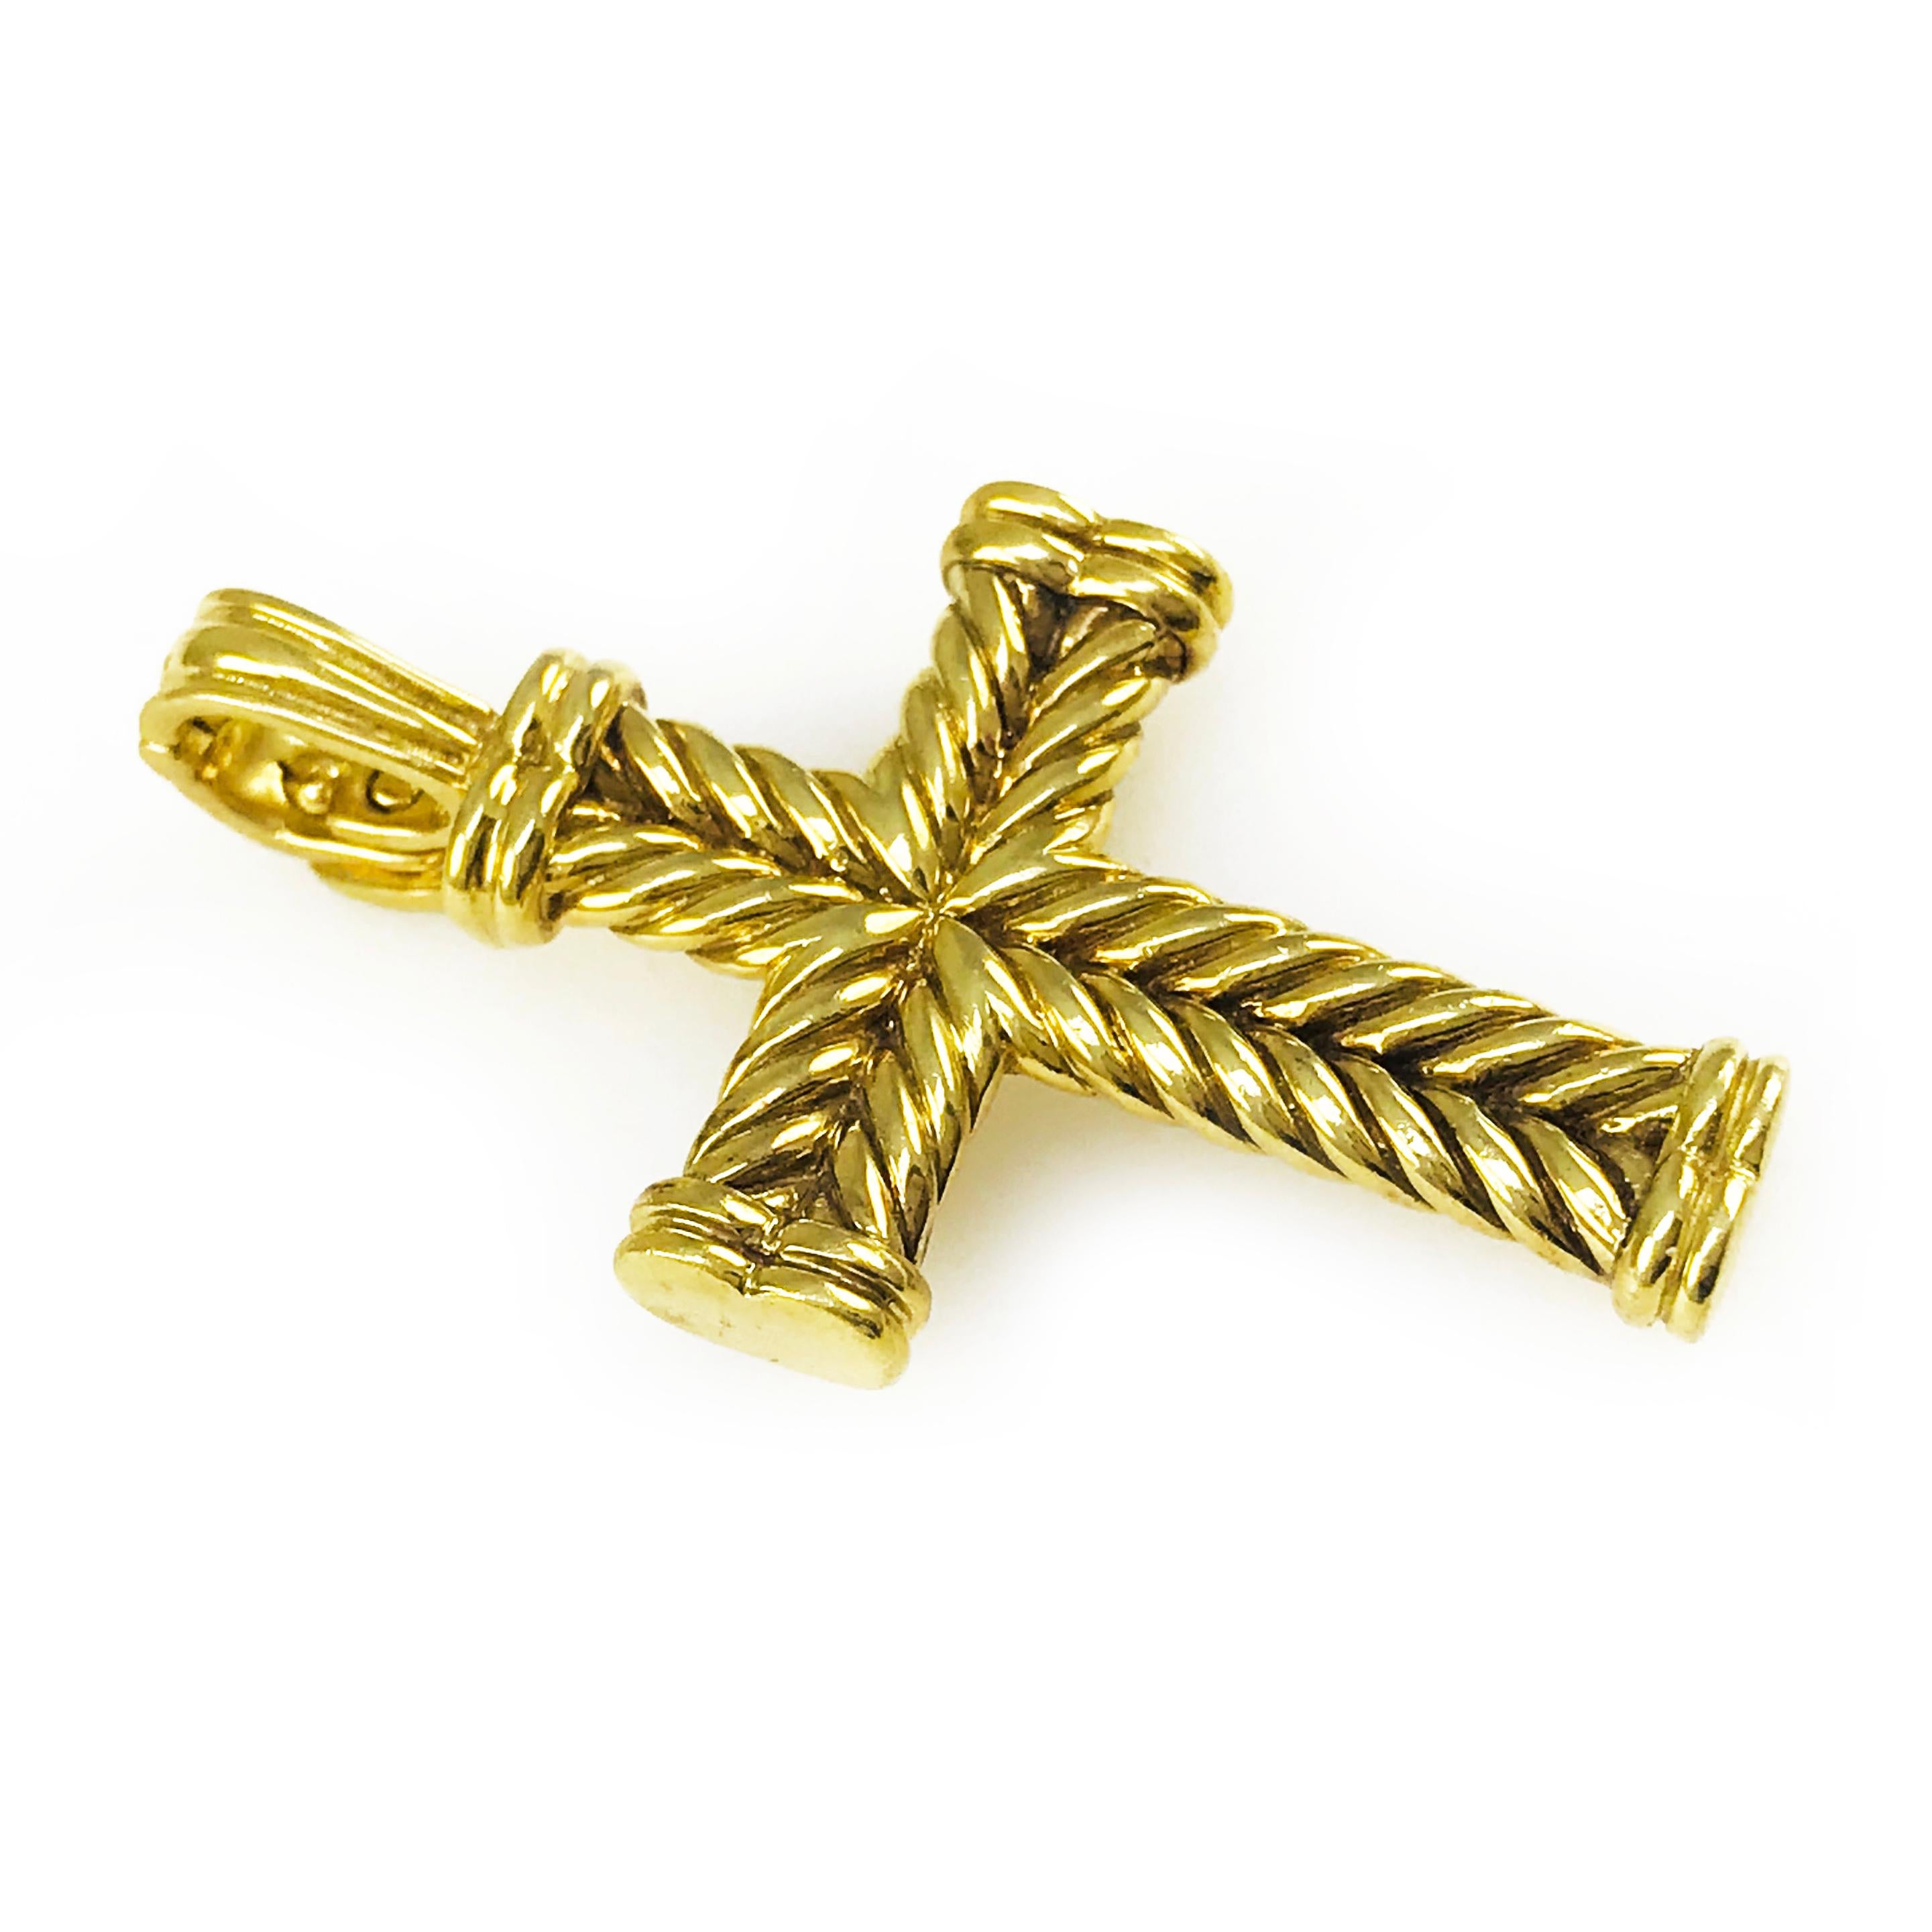 David Yurman 18k yellow gold cross pendant with opening bail. Yurman's signature cable motif is present in this significant cross pendant. Centered on the back of the cross is the hallmark ©D.Y. 750.